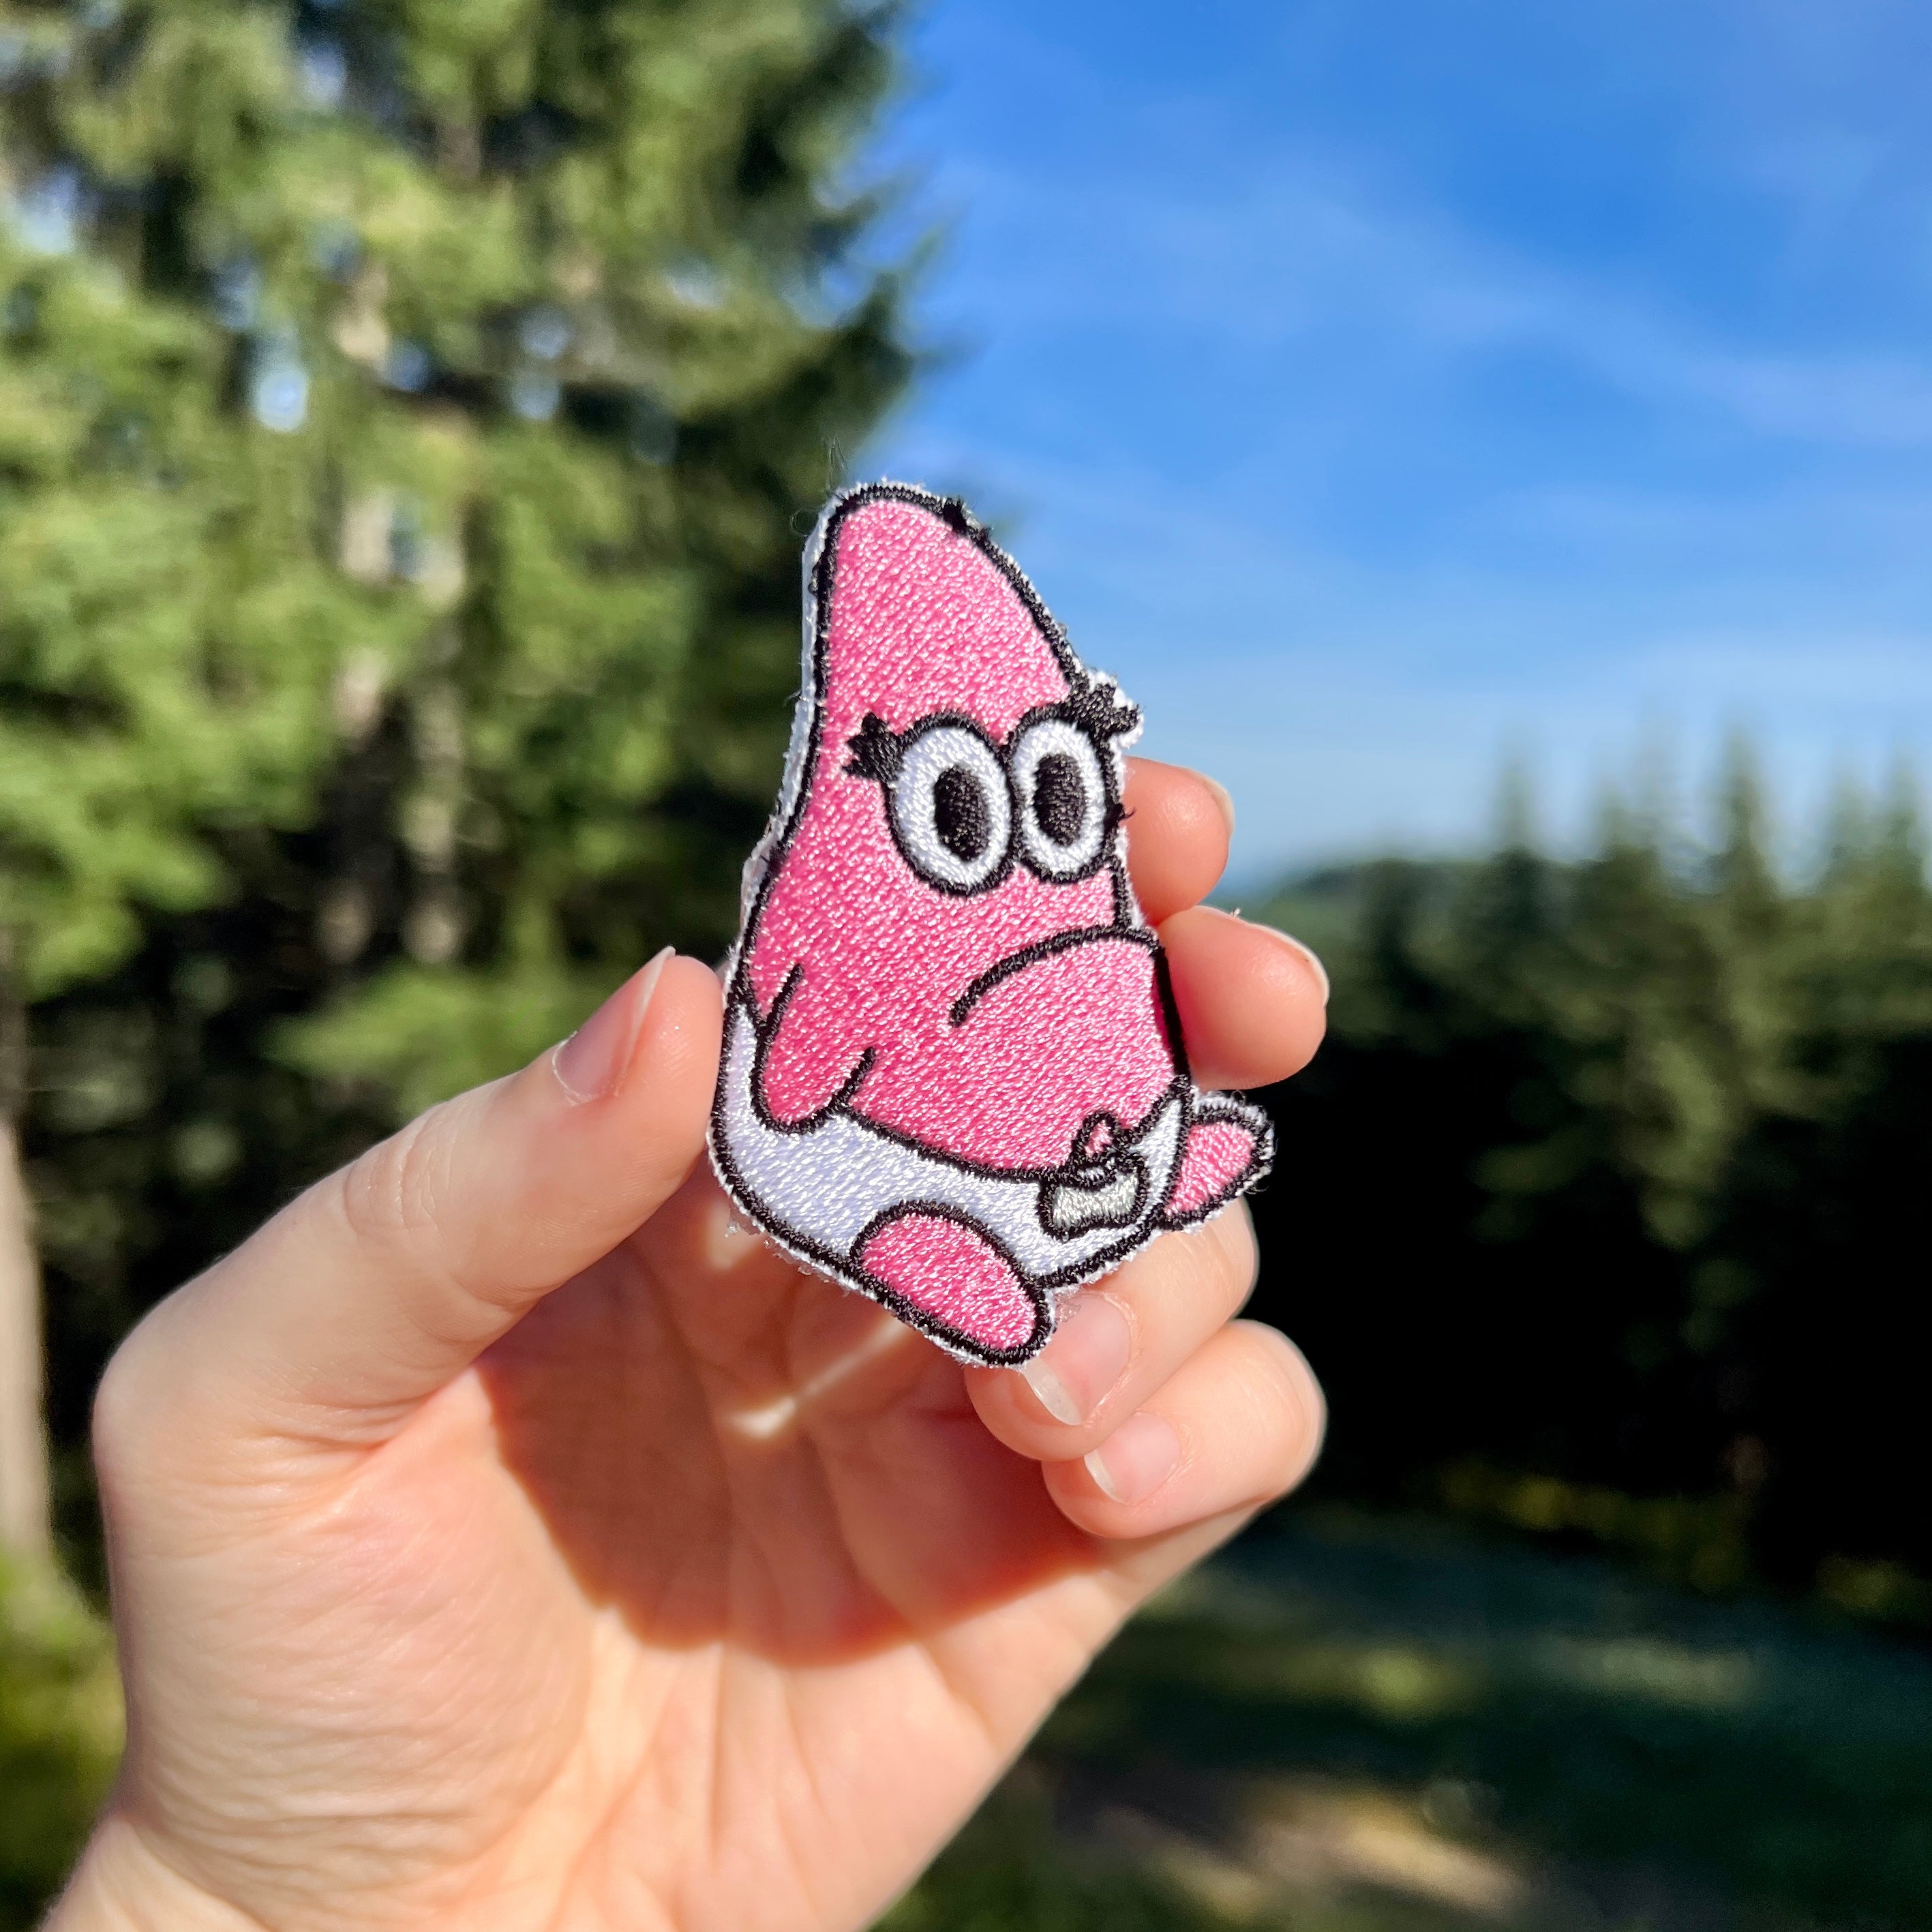 Baby Patrick Star Embroidered Iron-on Patch